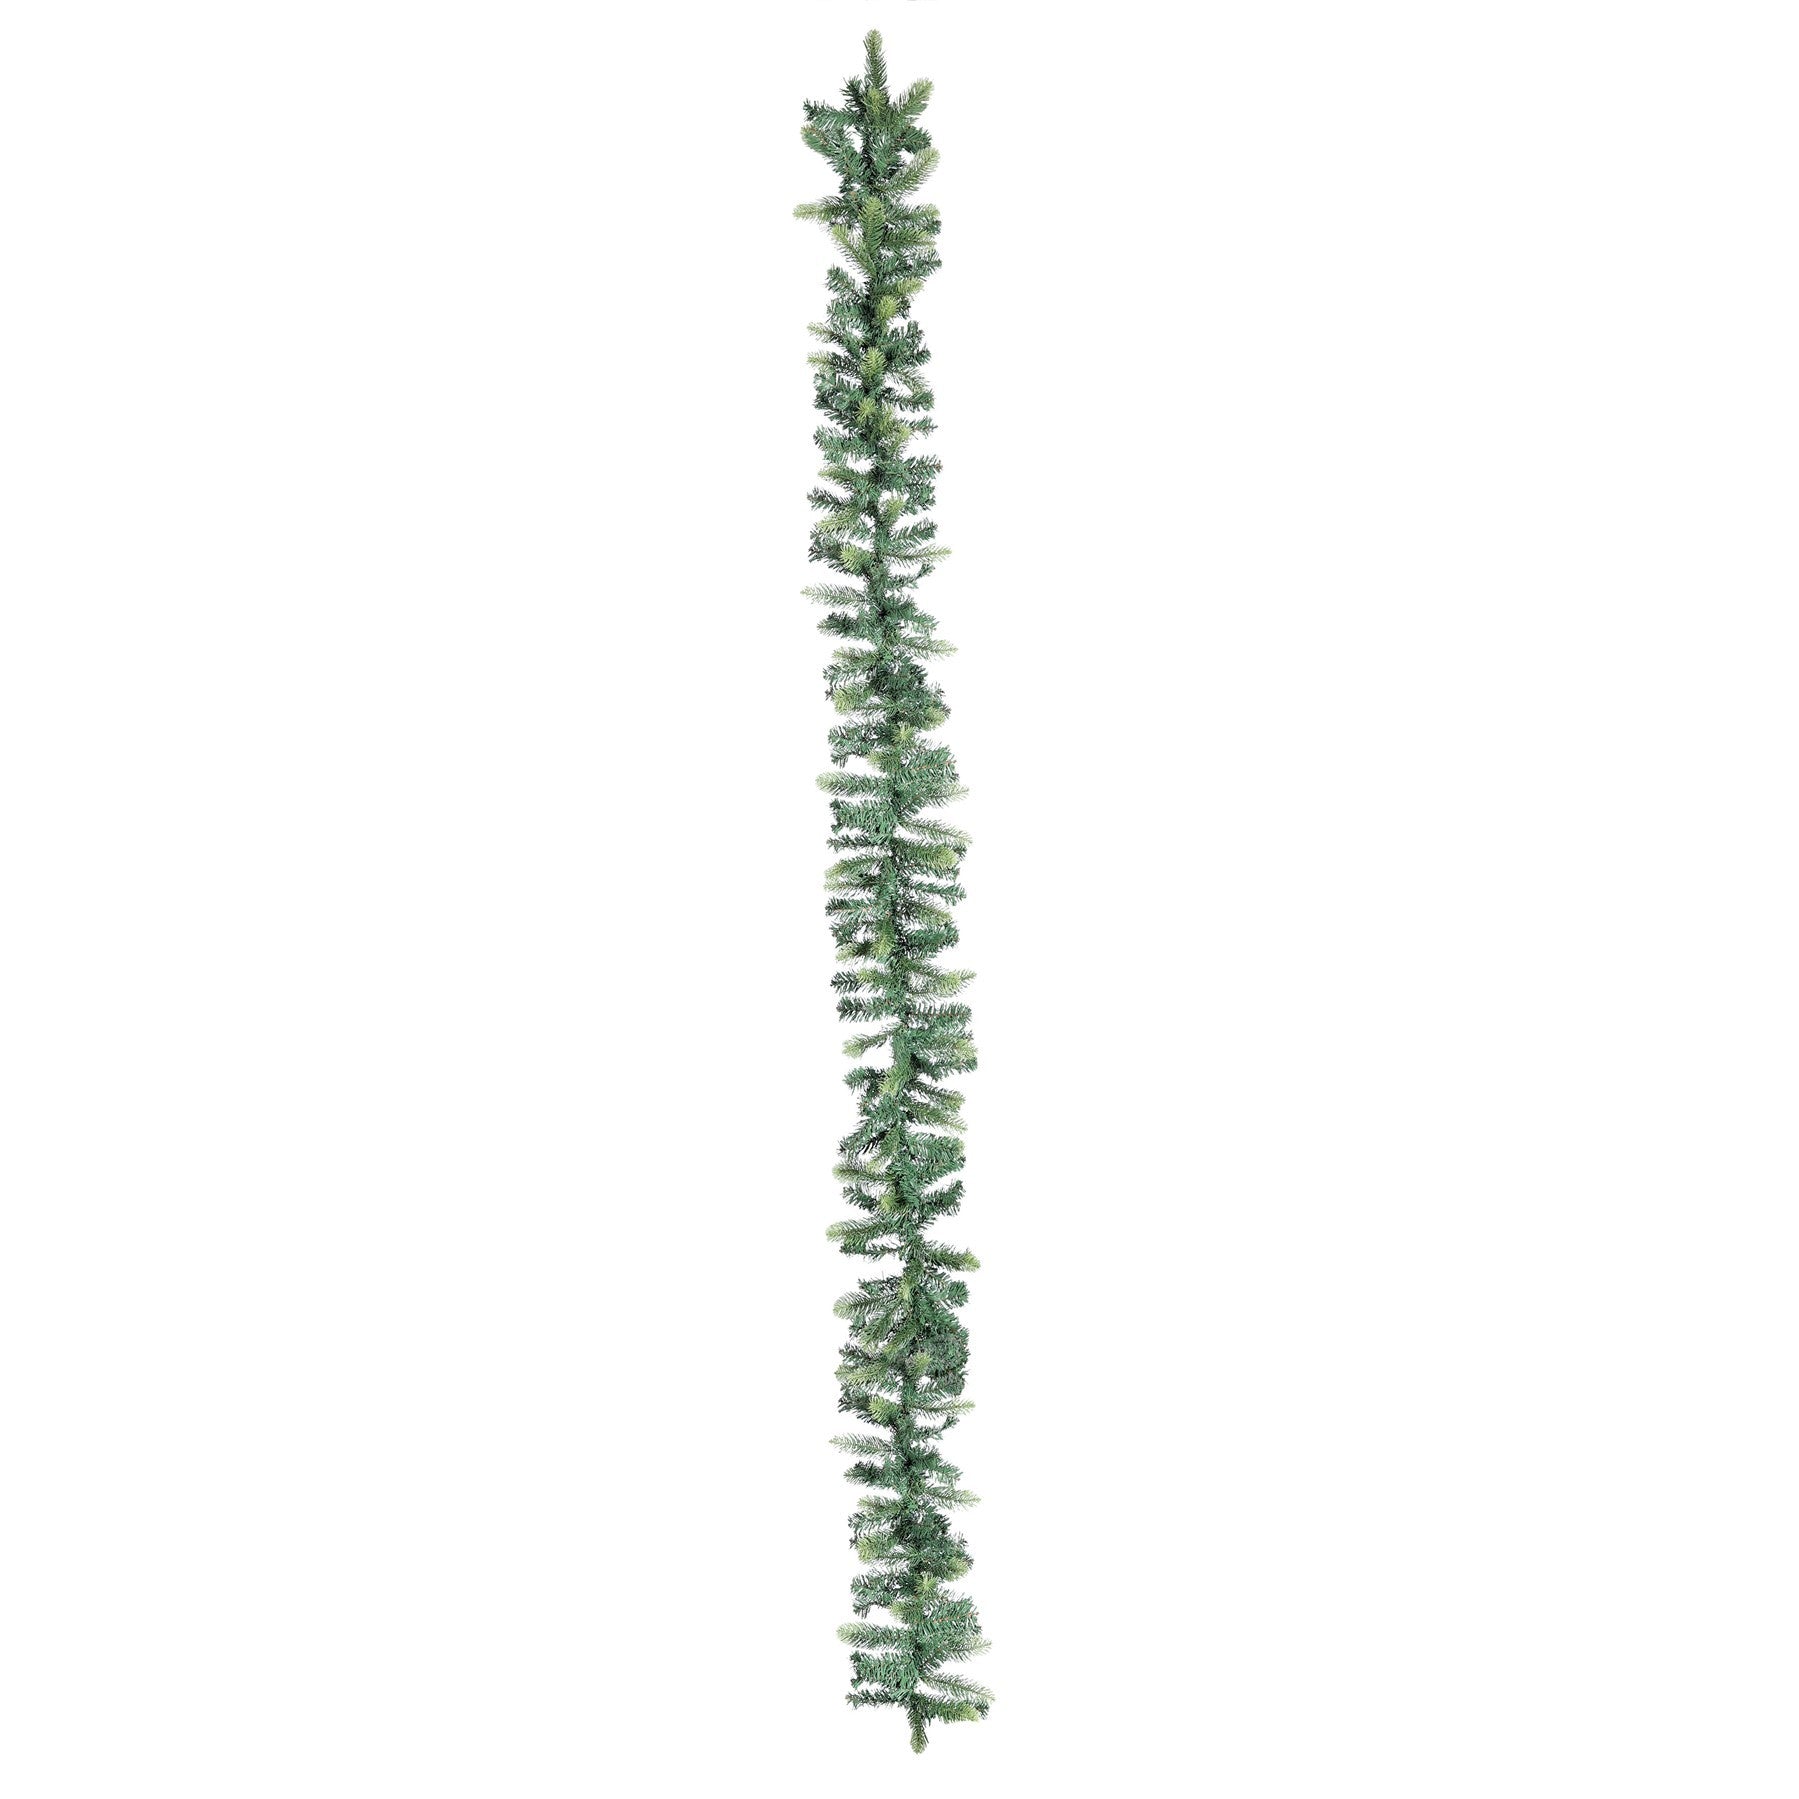 View 9ft Spruce Garland with 240 Tips information